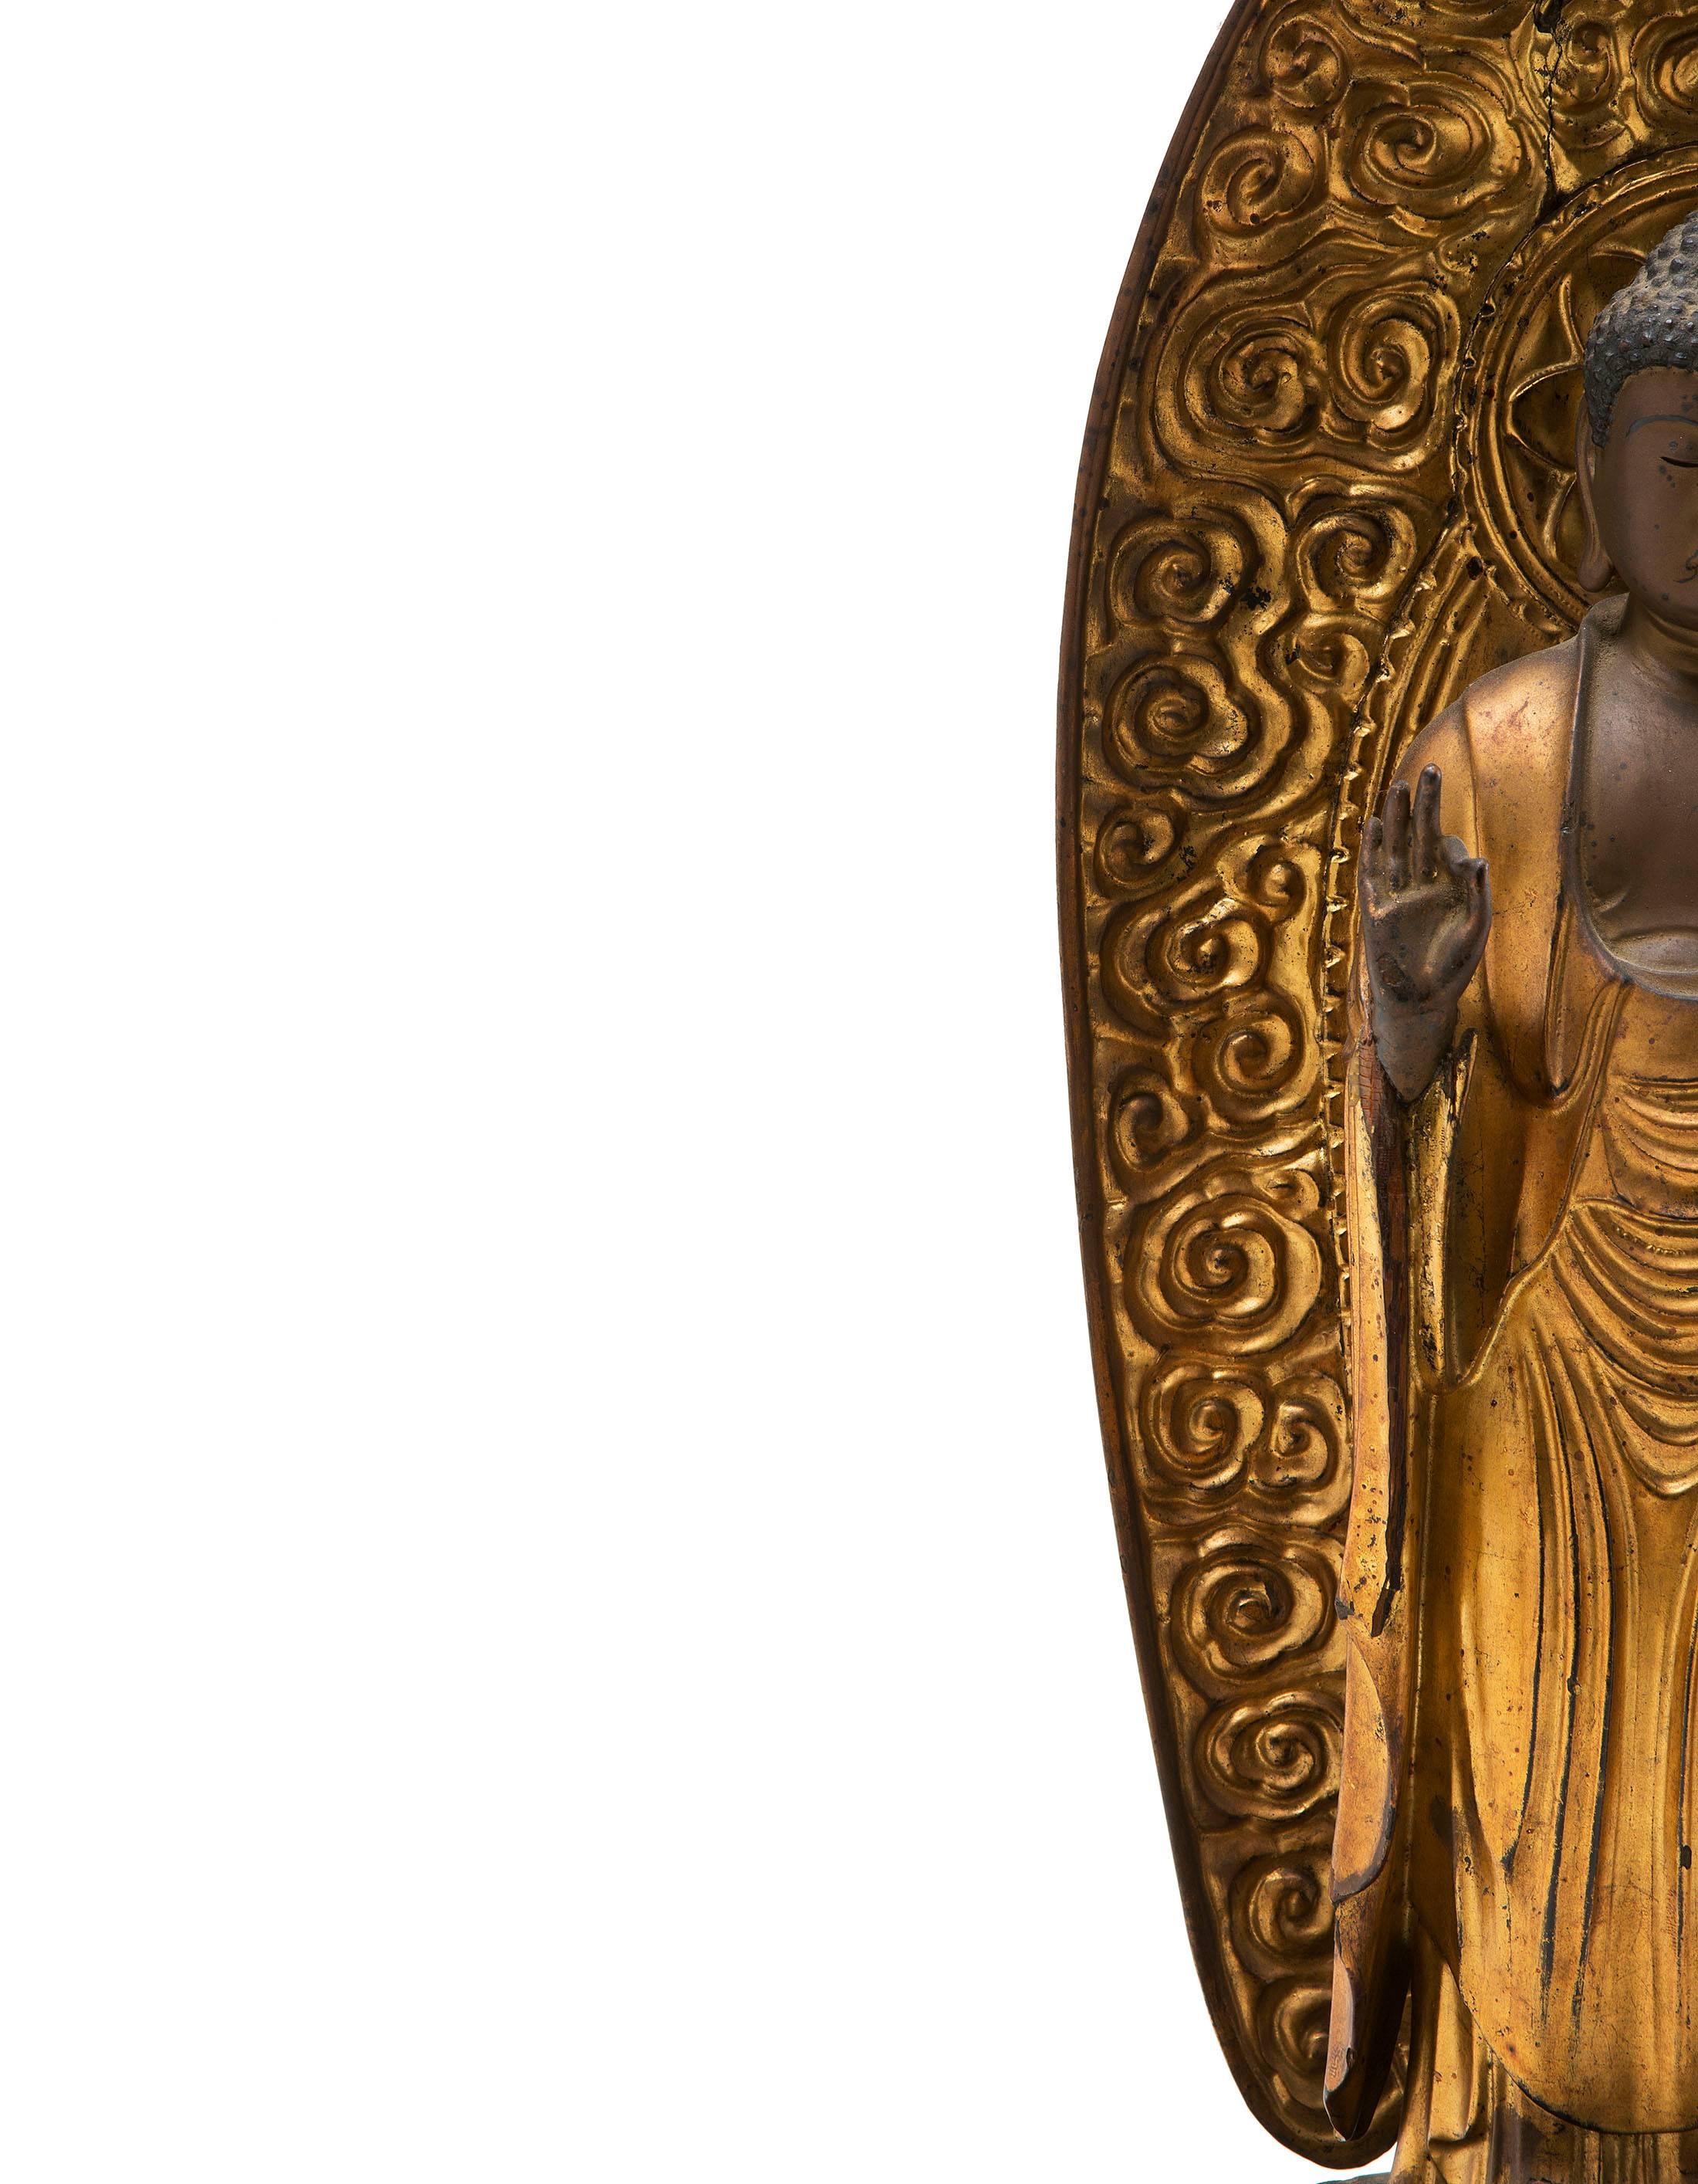 Japan, Edo period (1615-1868), 18th century
Measure: High 63 cm, long 26 cm.

Carved Gilded Wood Standing Amida Buddha. In gold lacquered wood representing the Buddha standing on a lotus posed on a hexagonal base with several worked levels, both